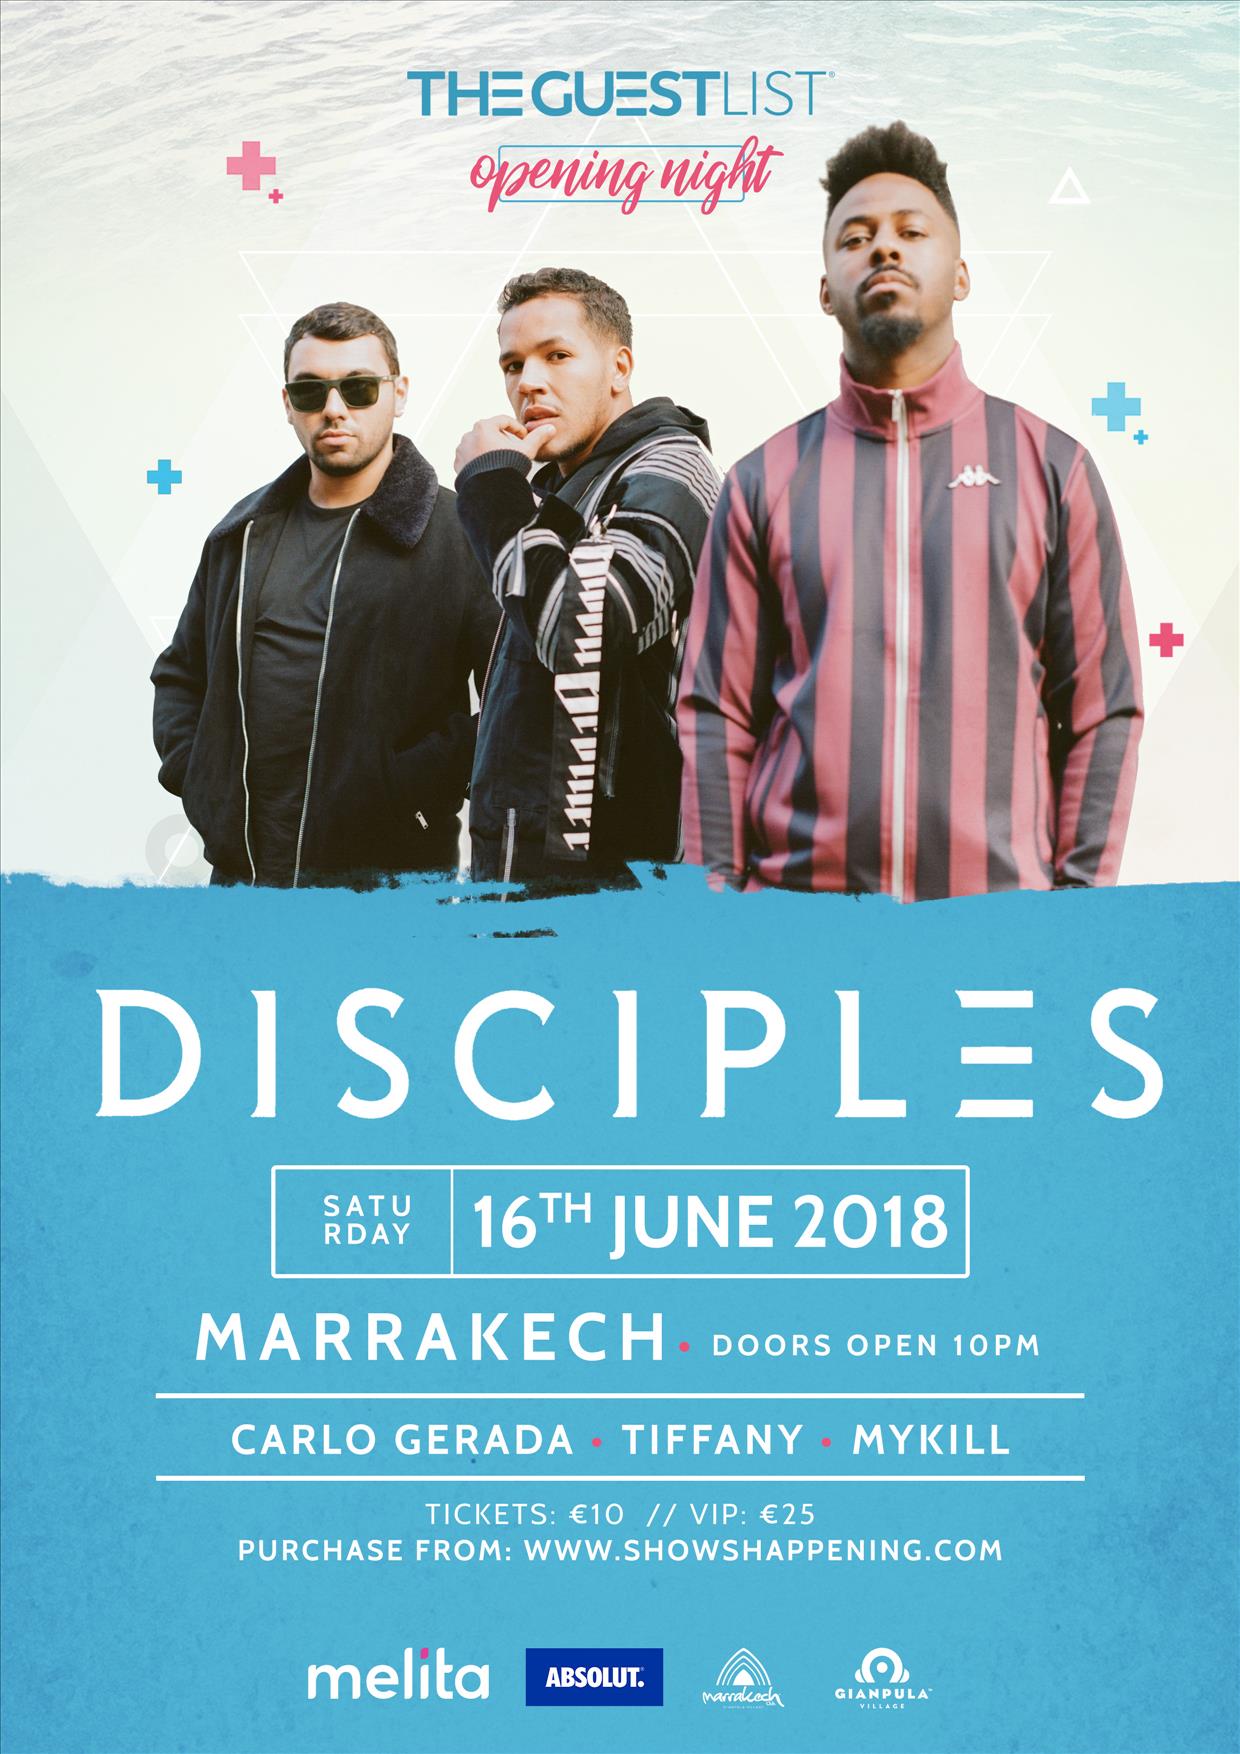 The Guestlist Opening featuring DISCIPLES 16:06:18 Marrakech Club poster